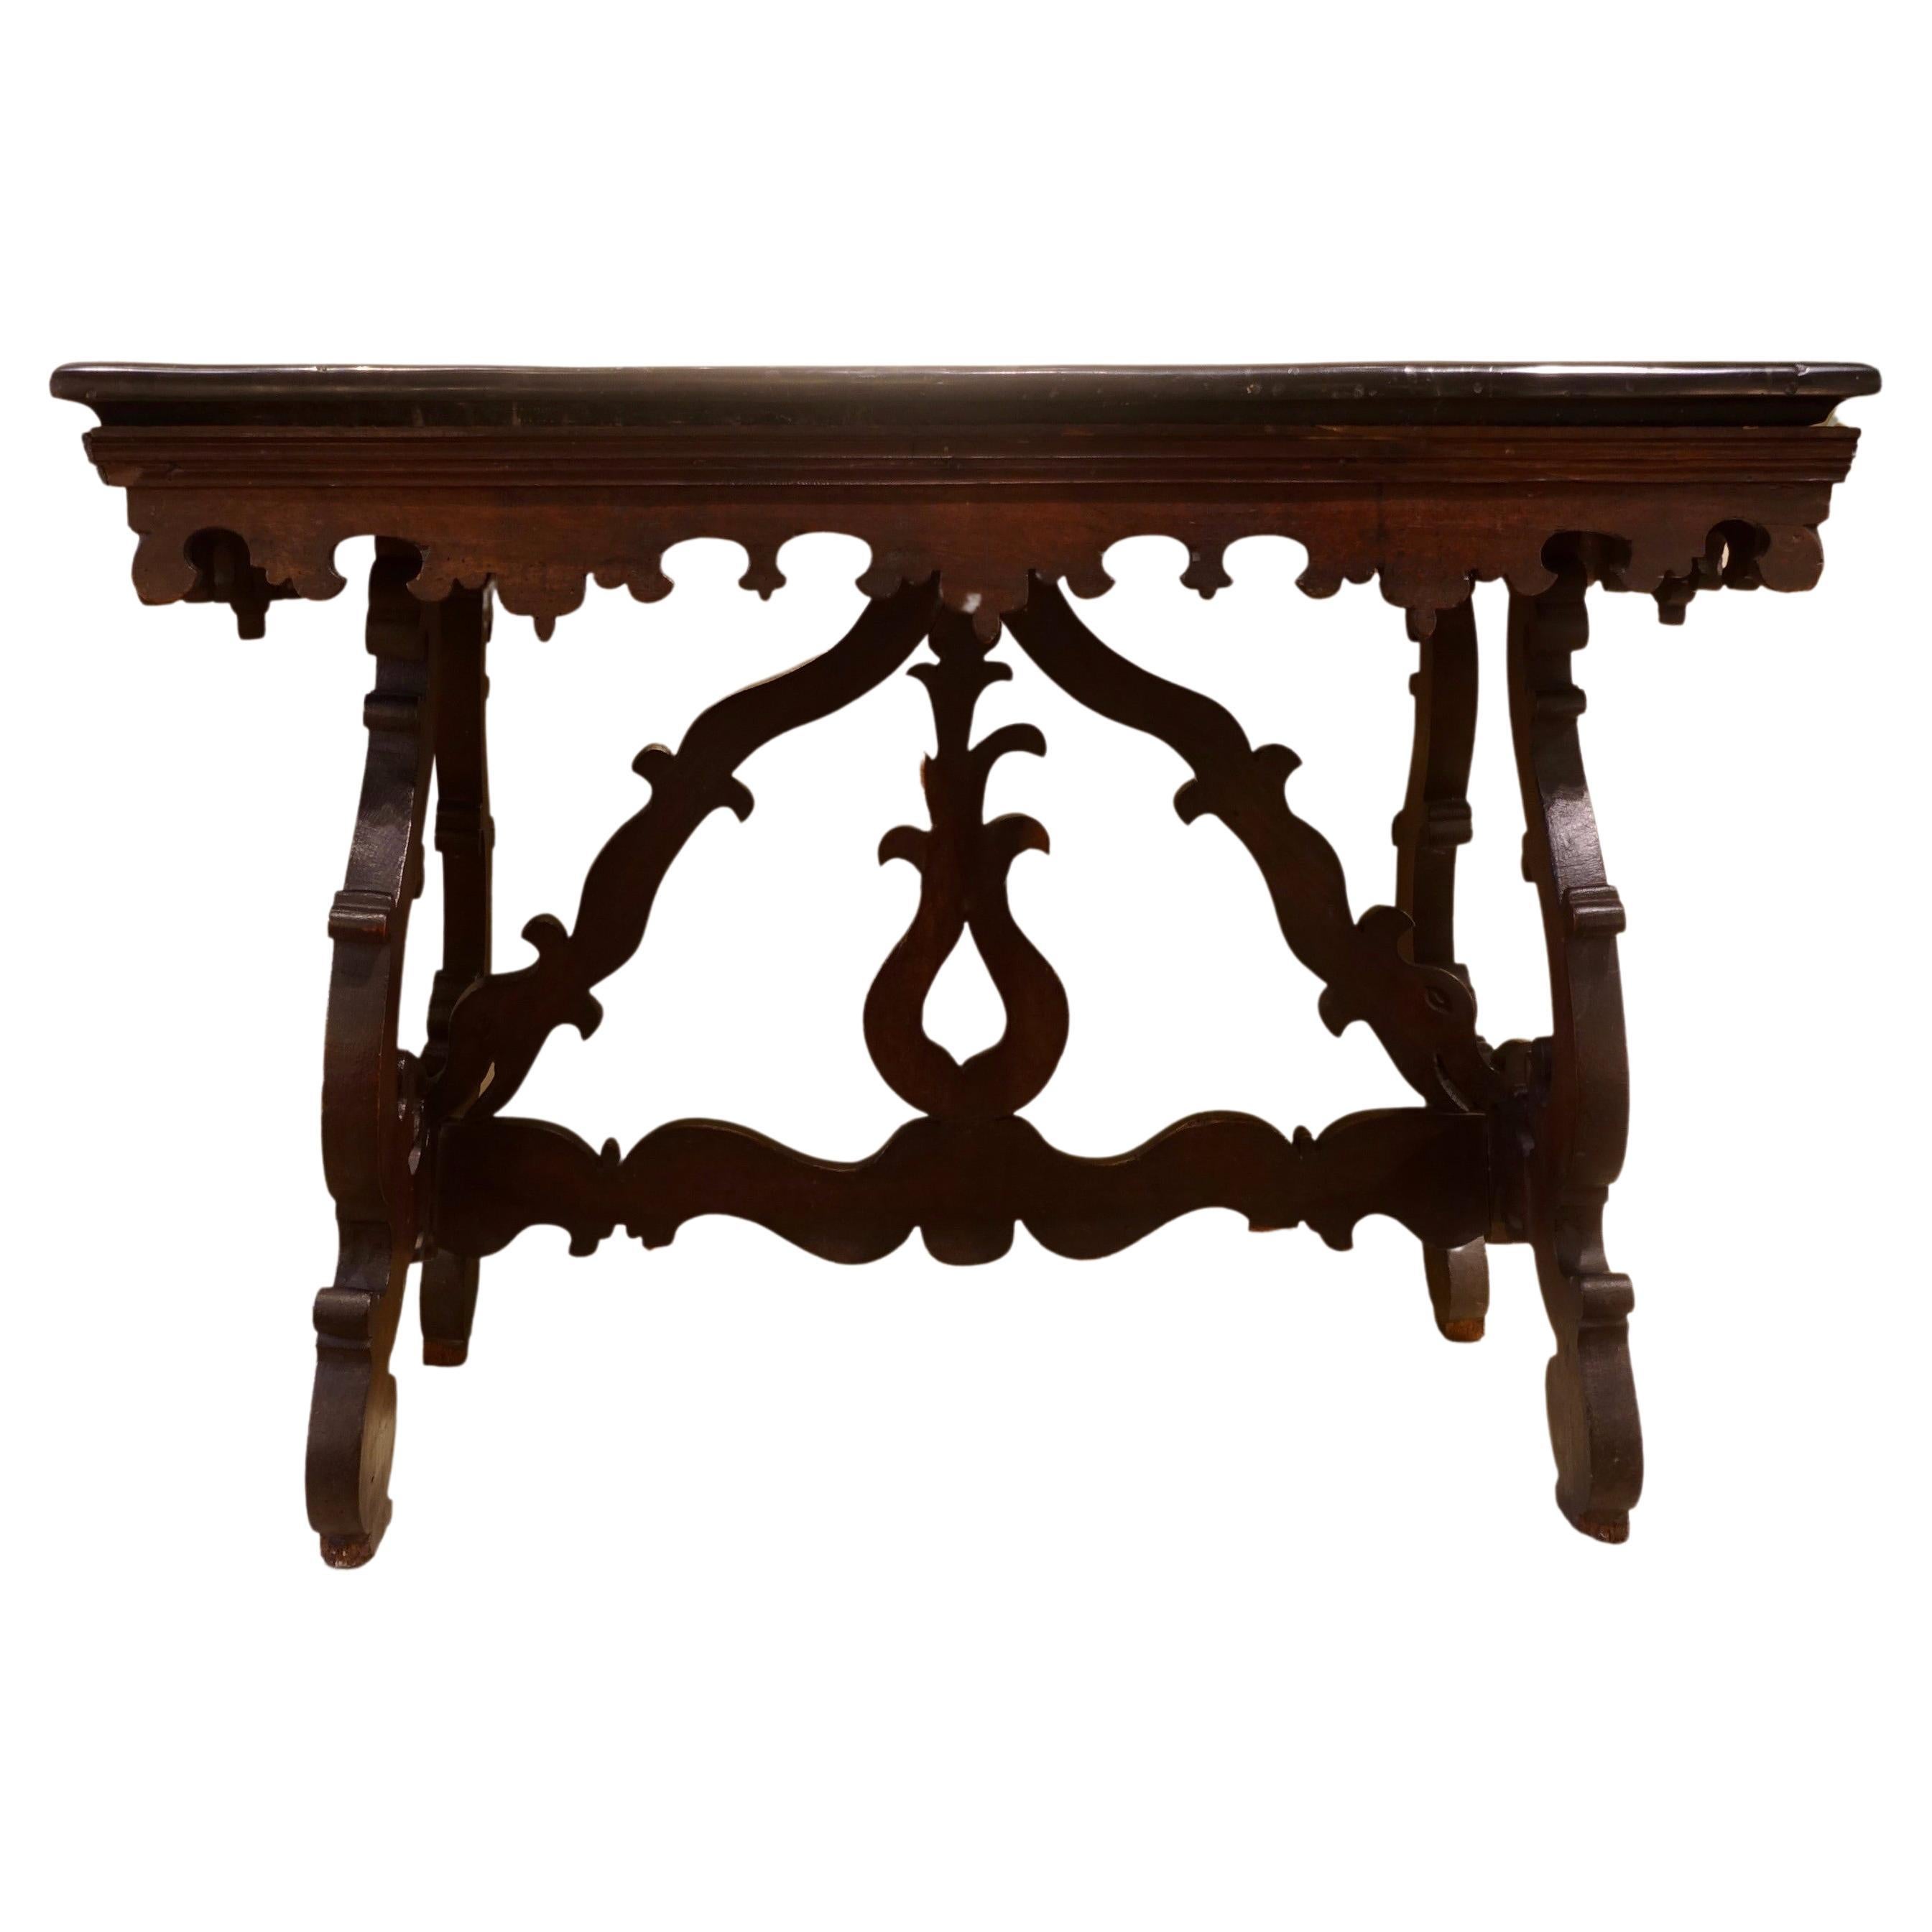 17th century wood and black marble table - North of Italy For Sale